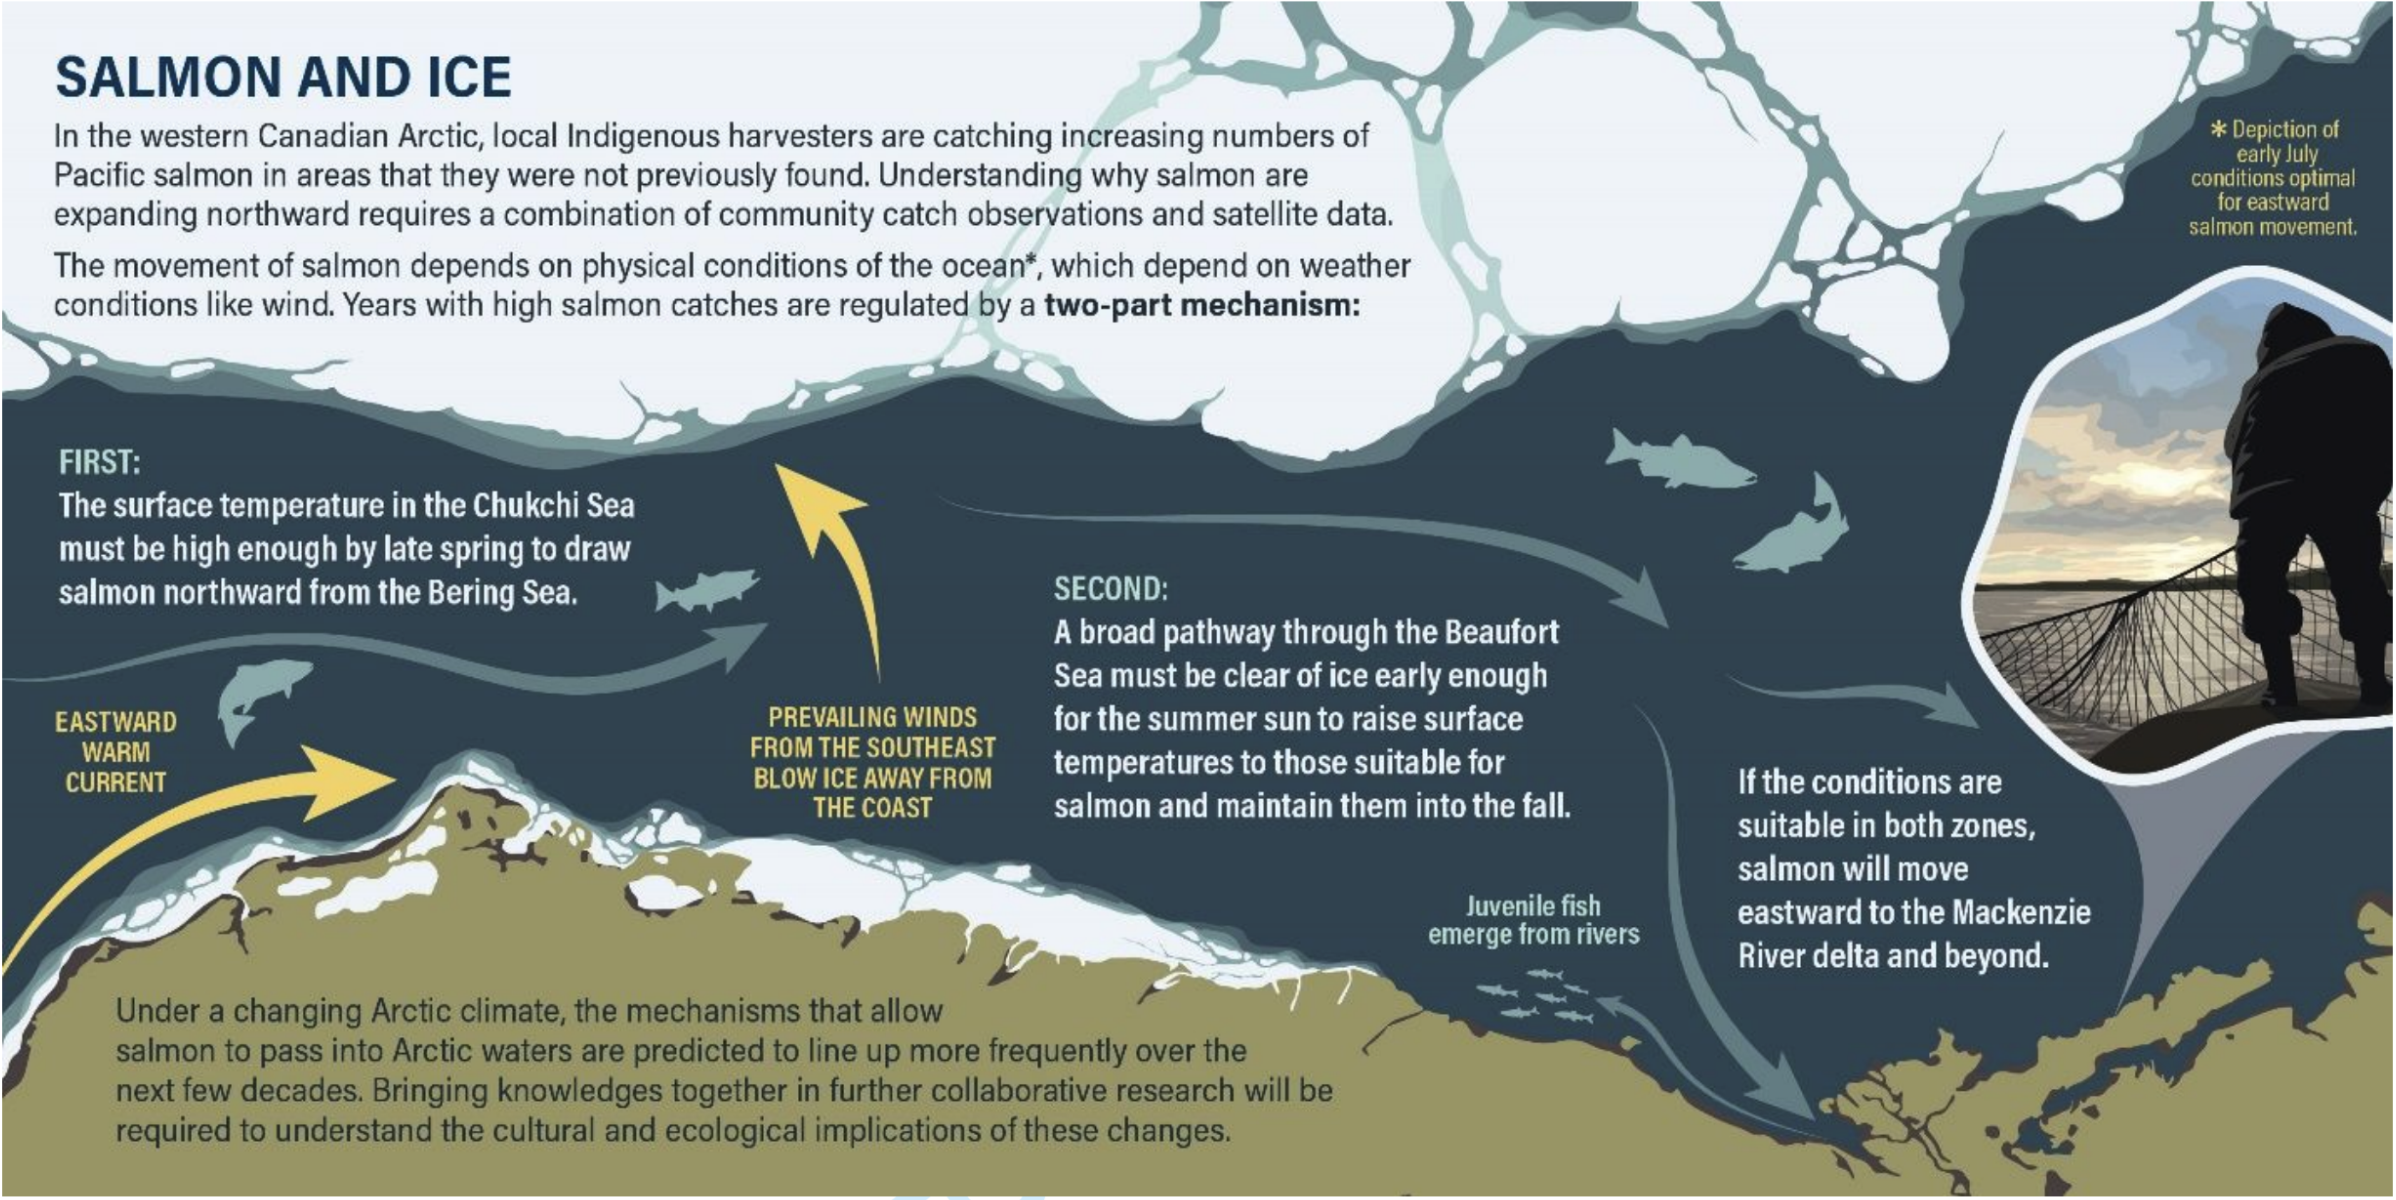 An infographic shows the ocean conditions north of Alaska that allow salmon to migrate to the western Canadian Arctic.